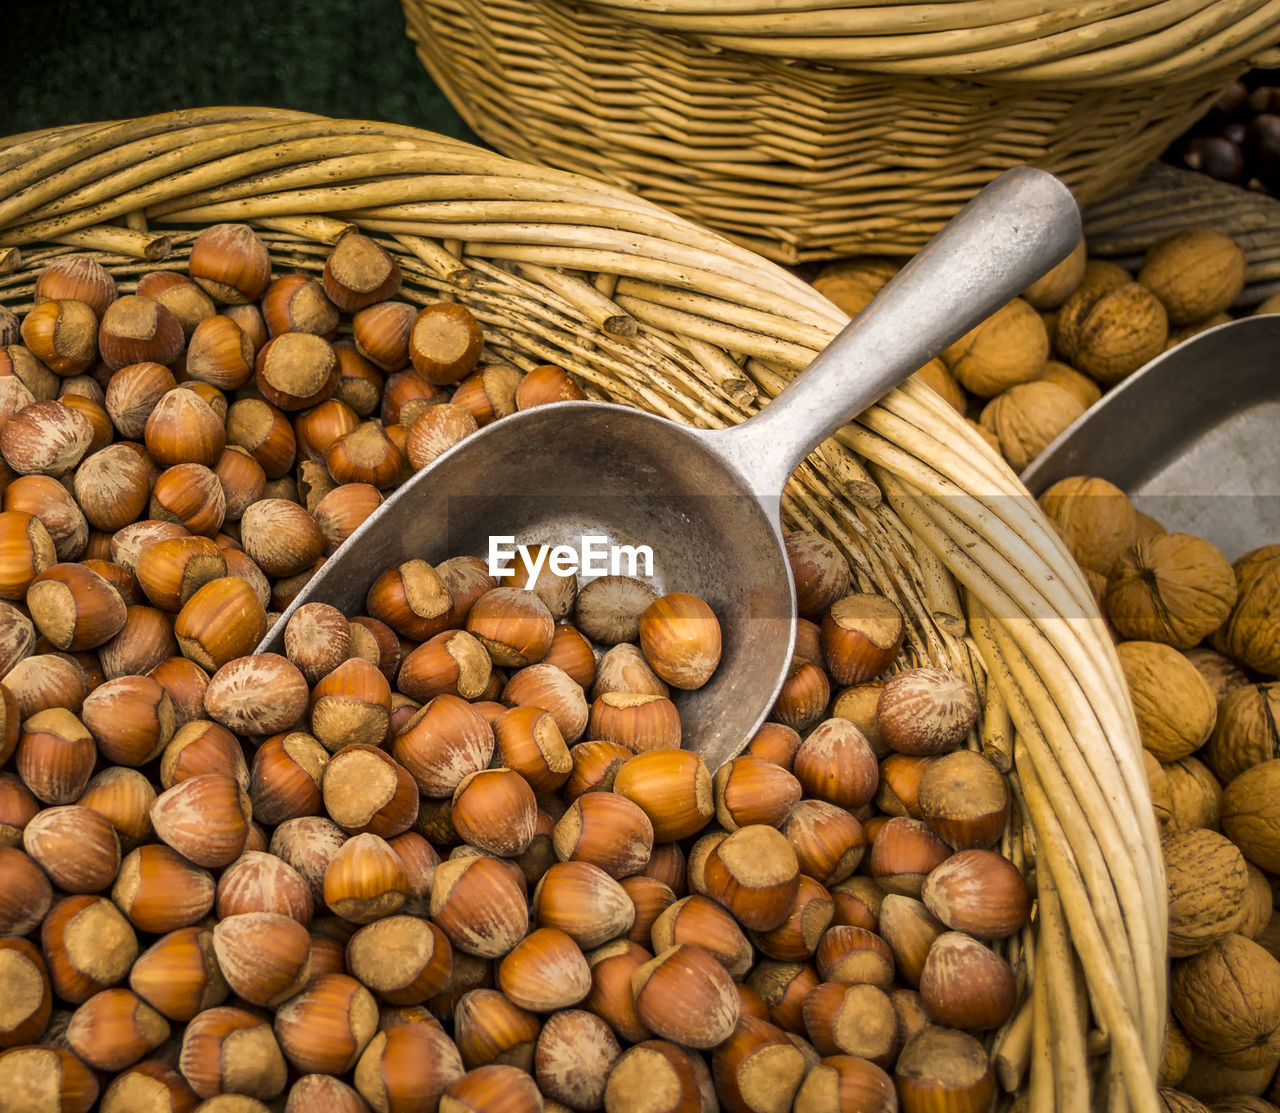 Close-up of nuts in basket